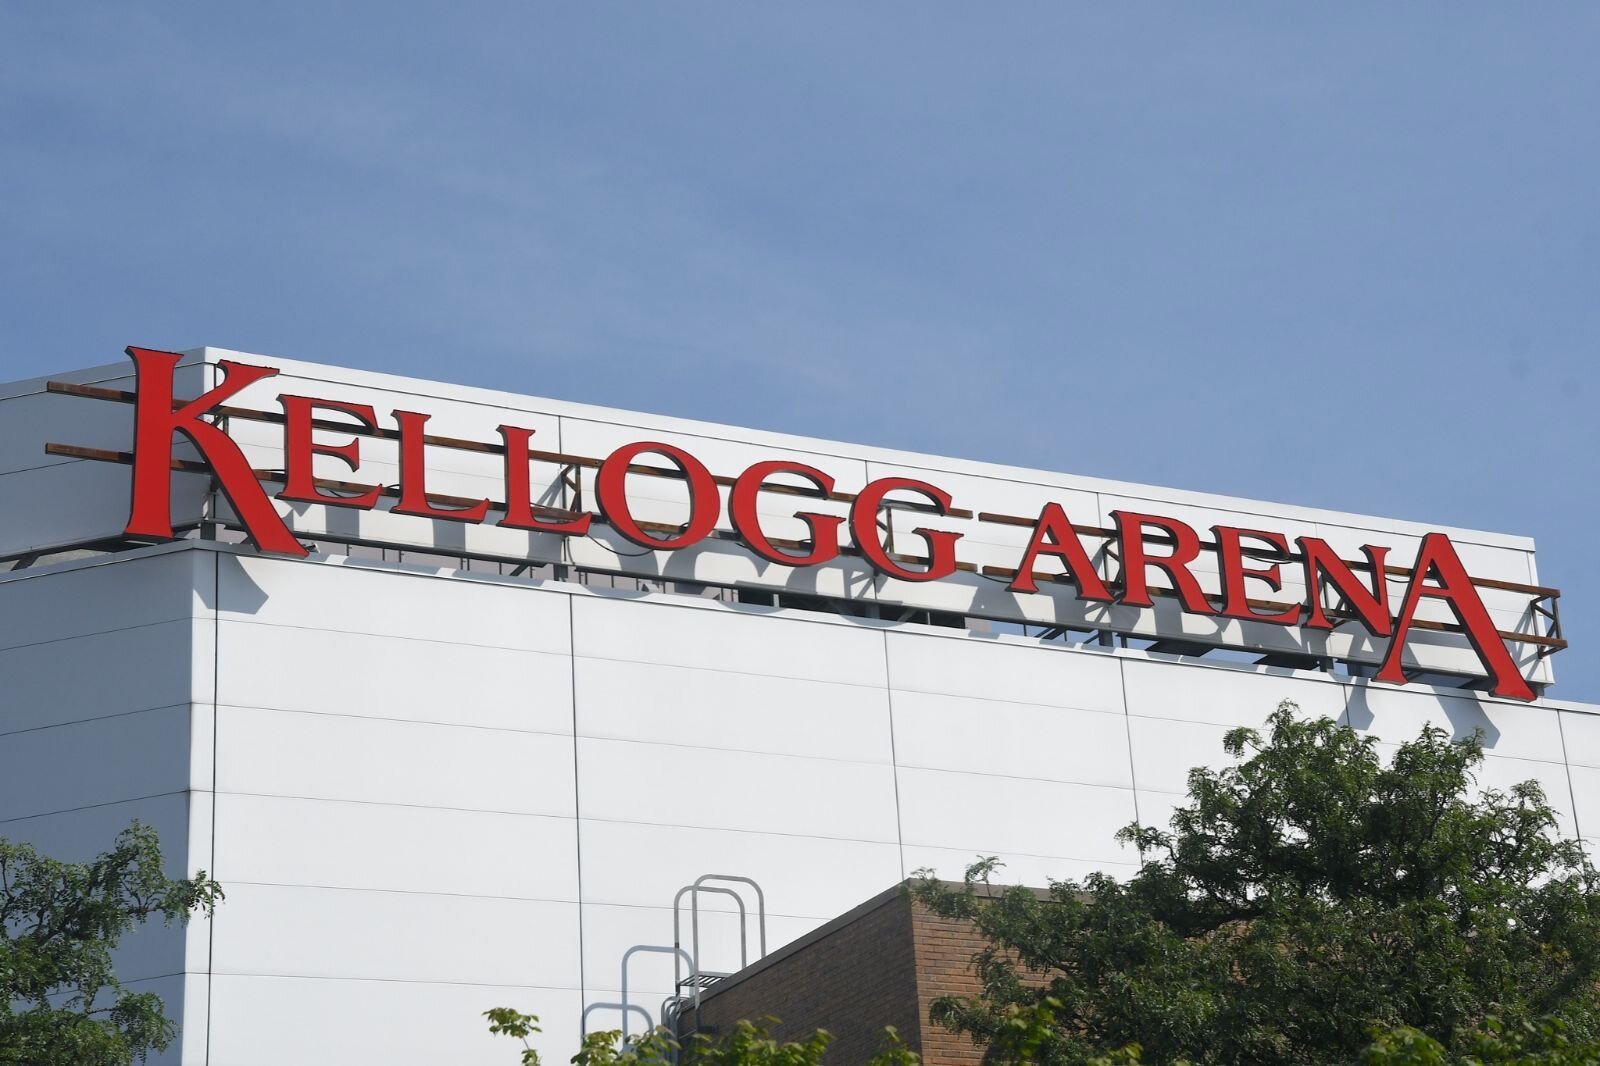 Kellogg Arena sits in the heart of downtown Battle Creek.